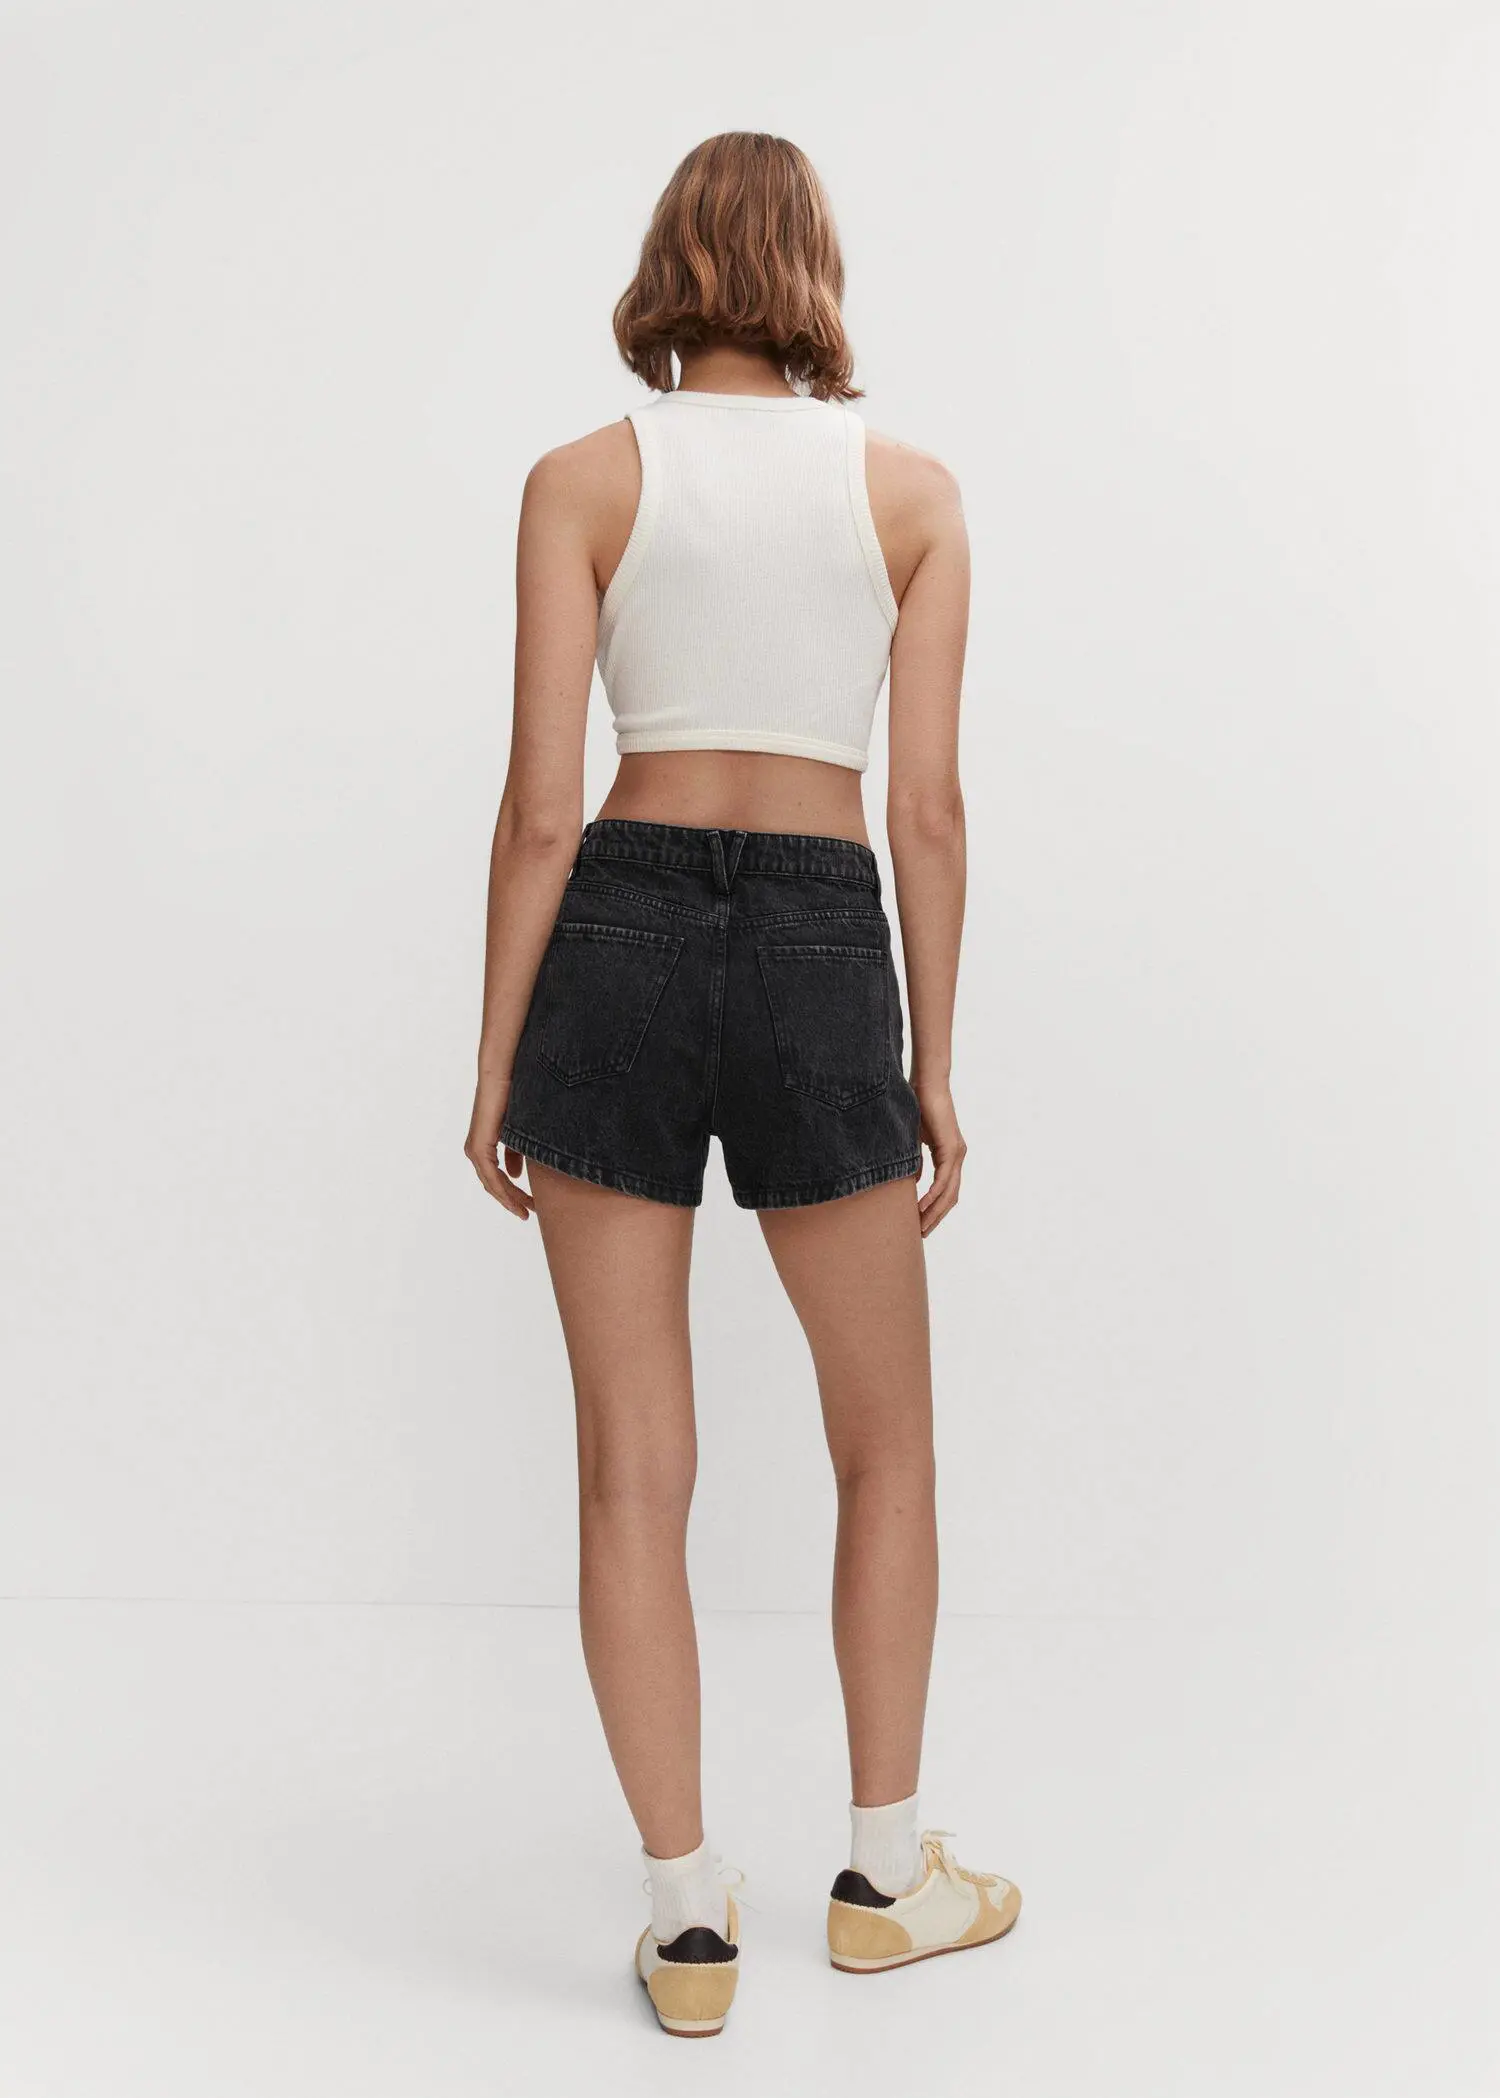 Mango Denim shorts with buttons. a woman wearing black shorts and a white top. 